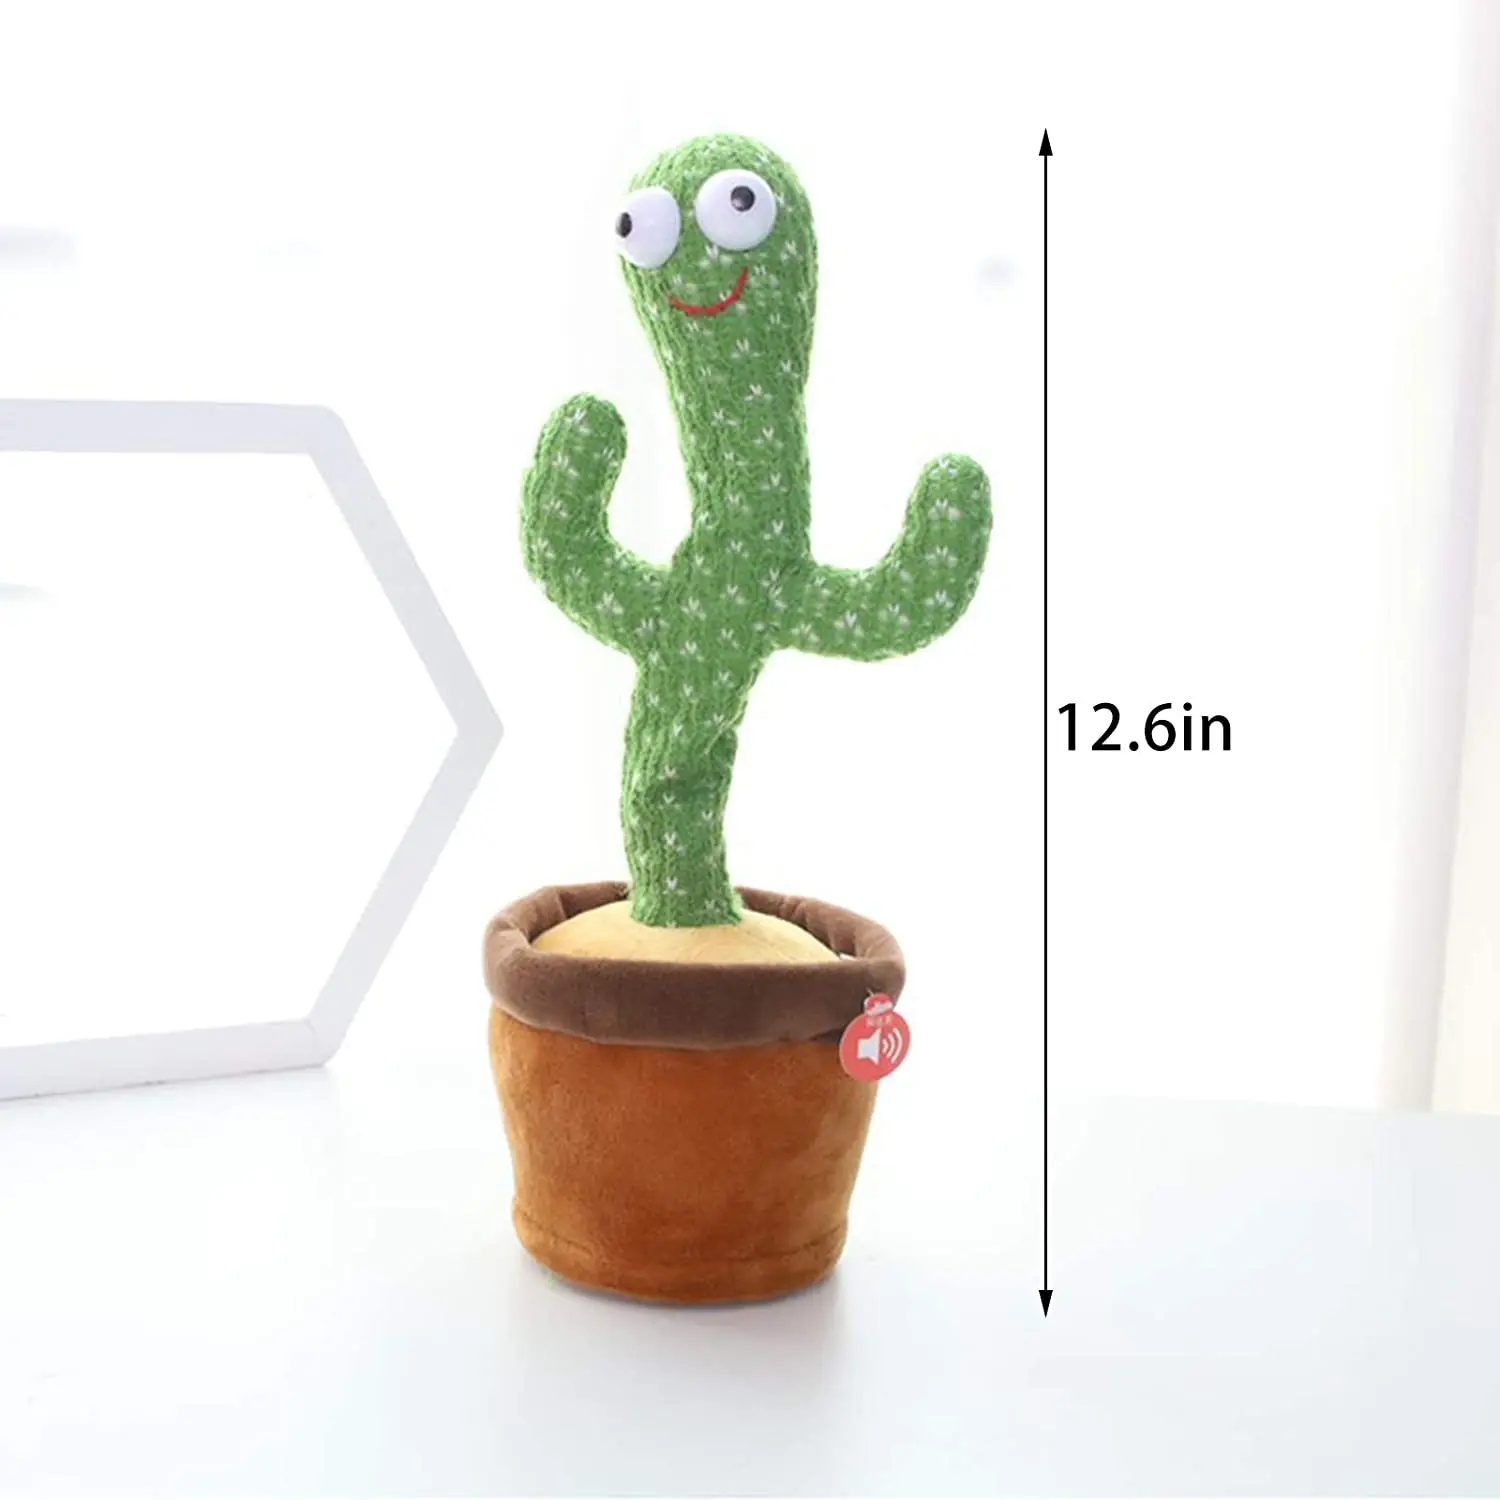 New Electronic Dancing Cactus Singing Dancing Decoration Gift for Kids Funny Early Education Toys Knitted Fabric Plush Toys